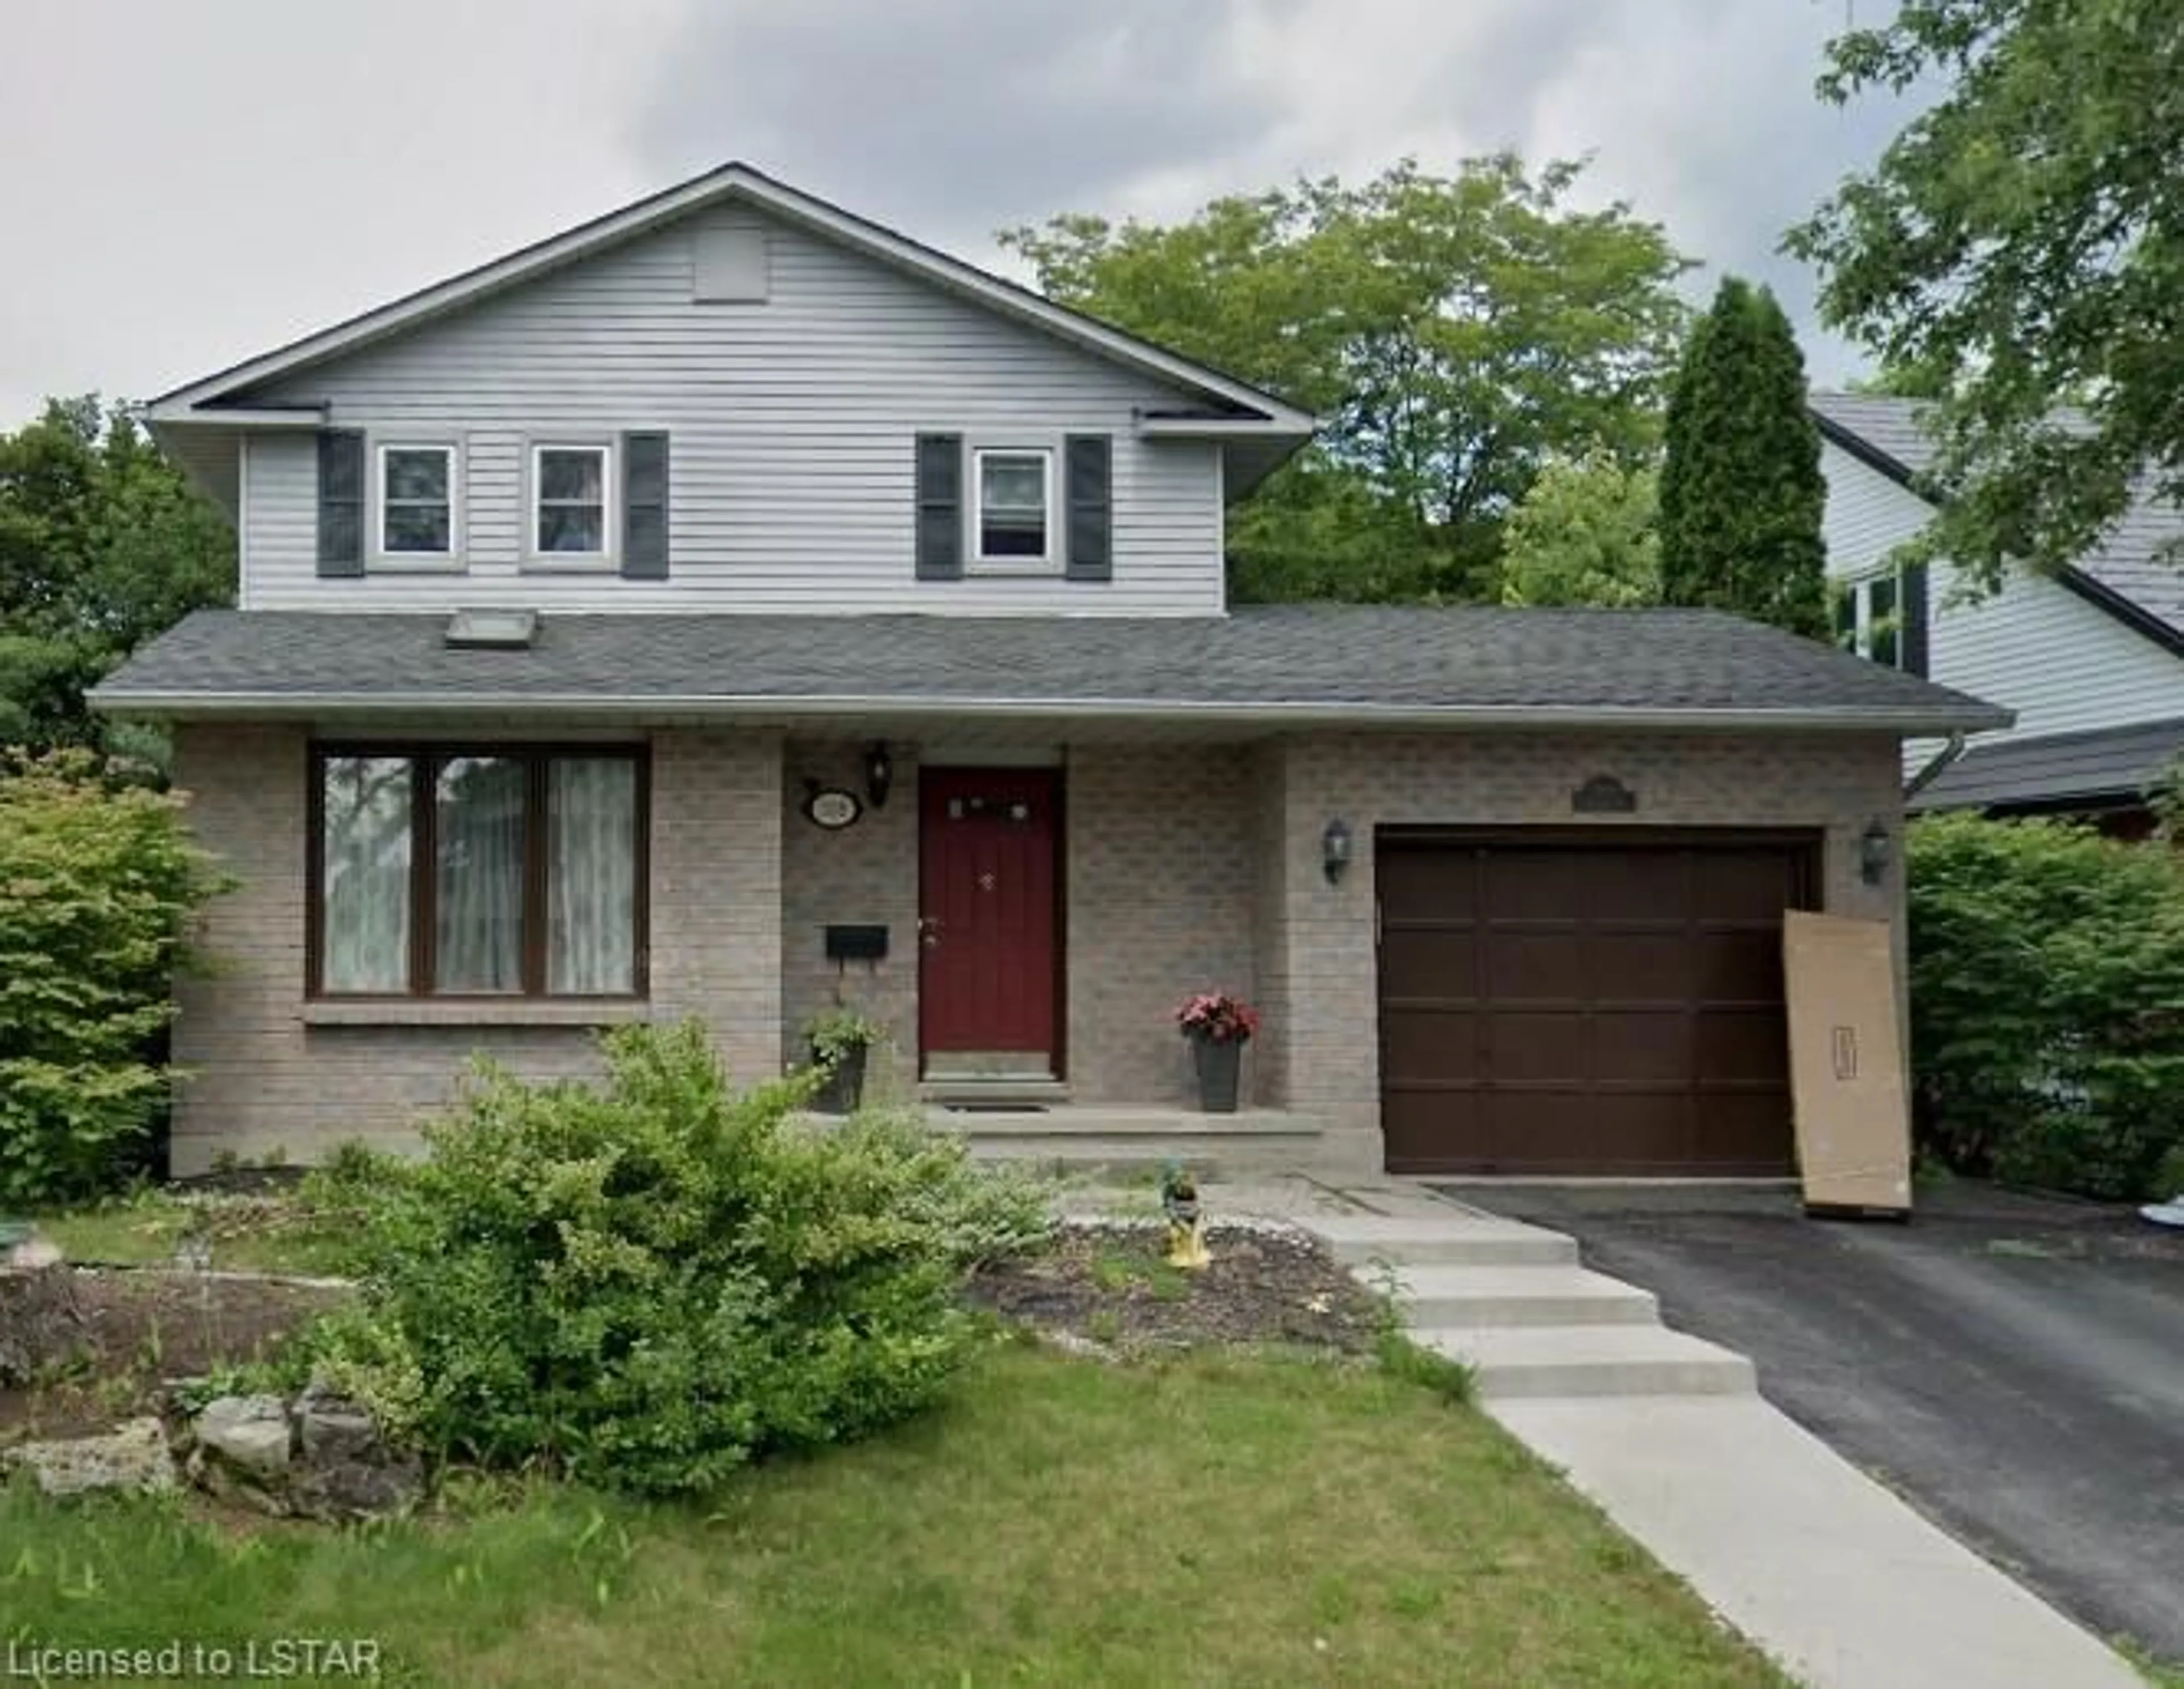 Home with unknown exterior material for 308 Castlegrove Blvd, London Ontario N6G 3T5